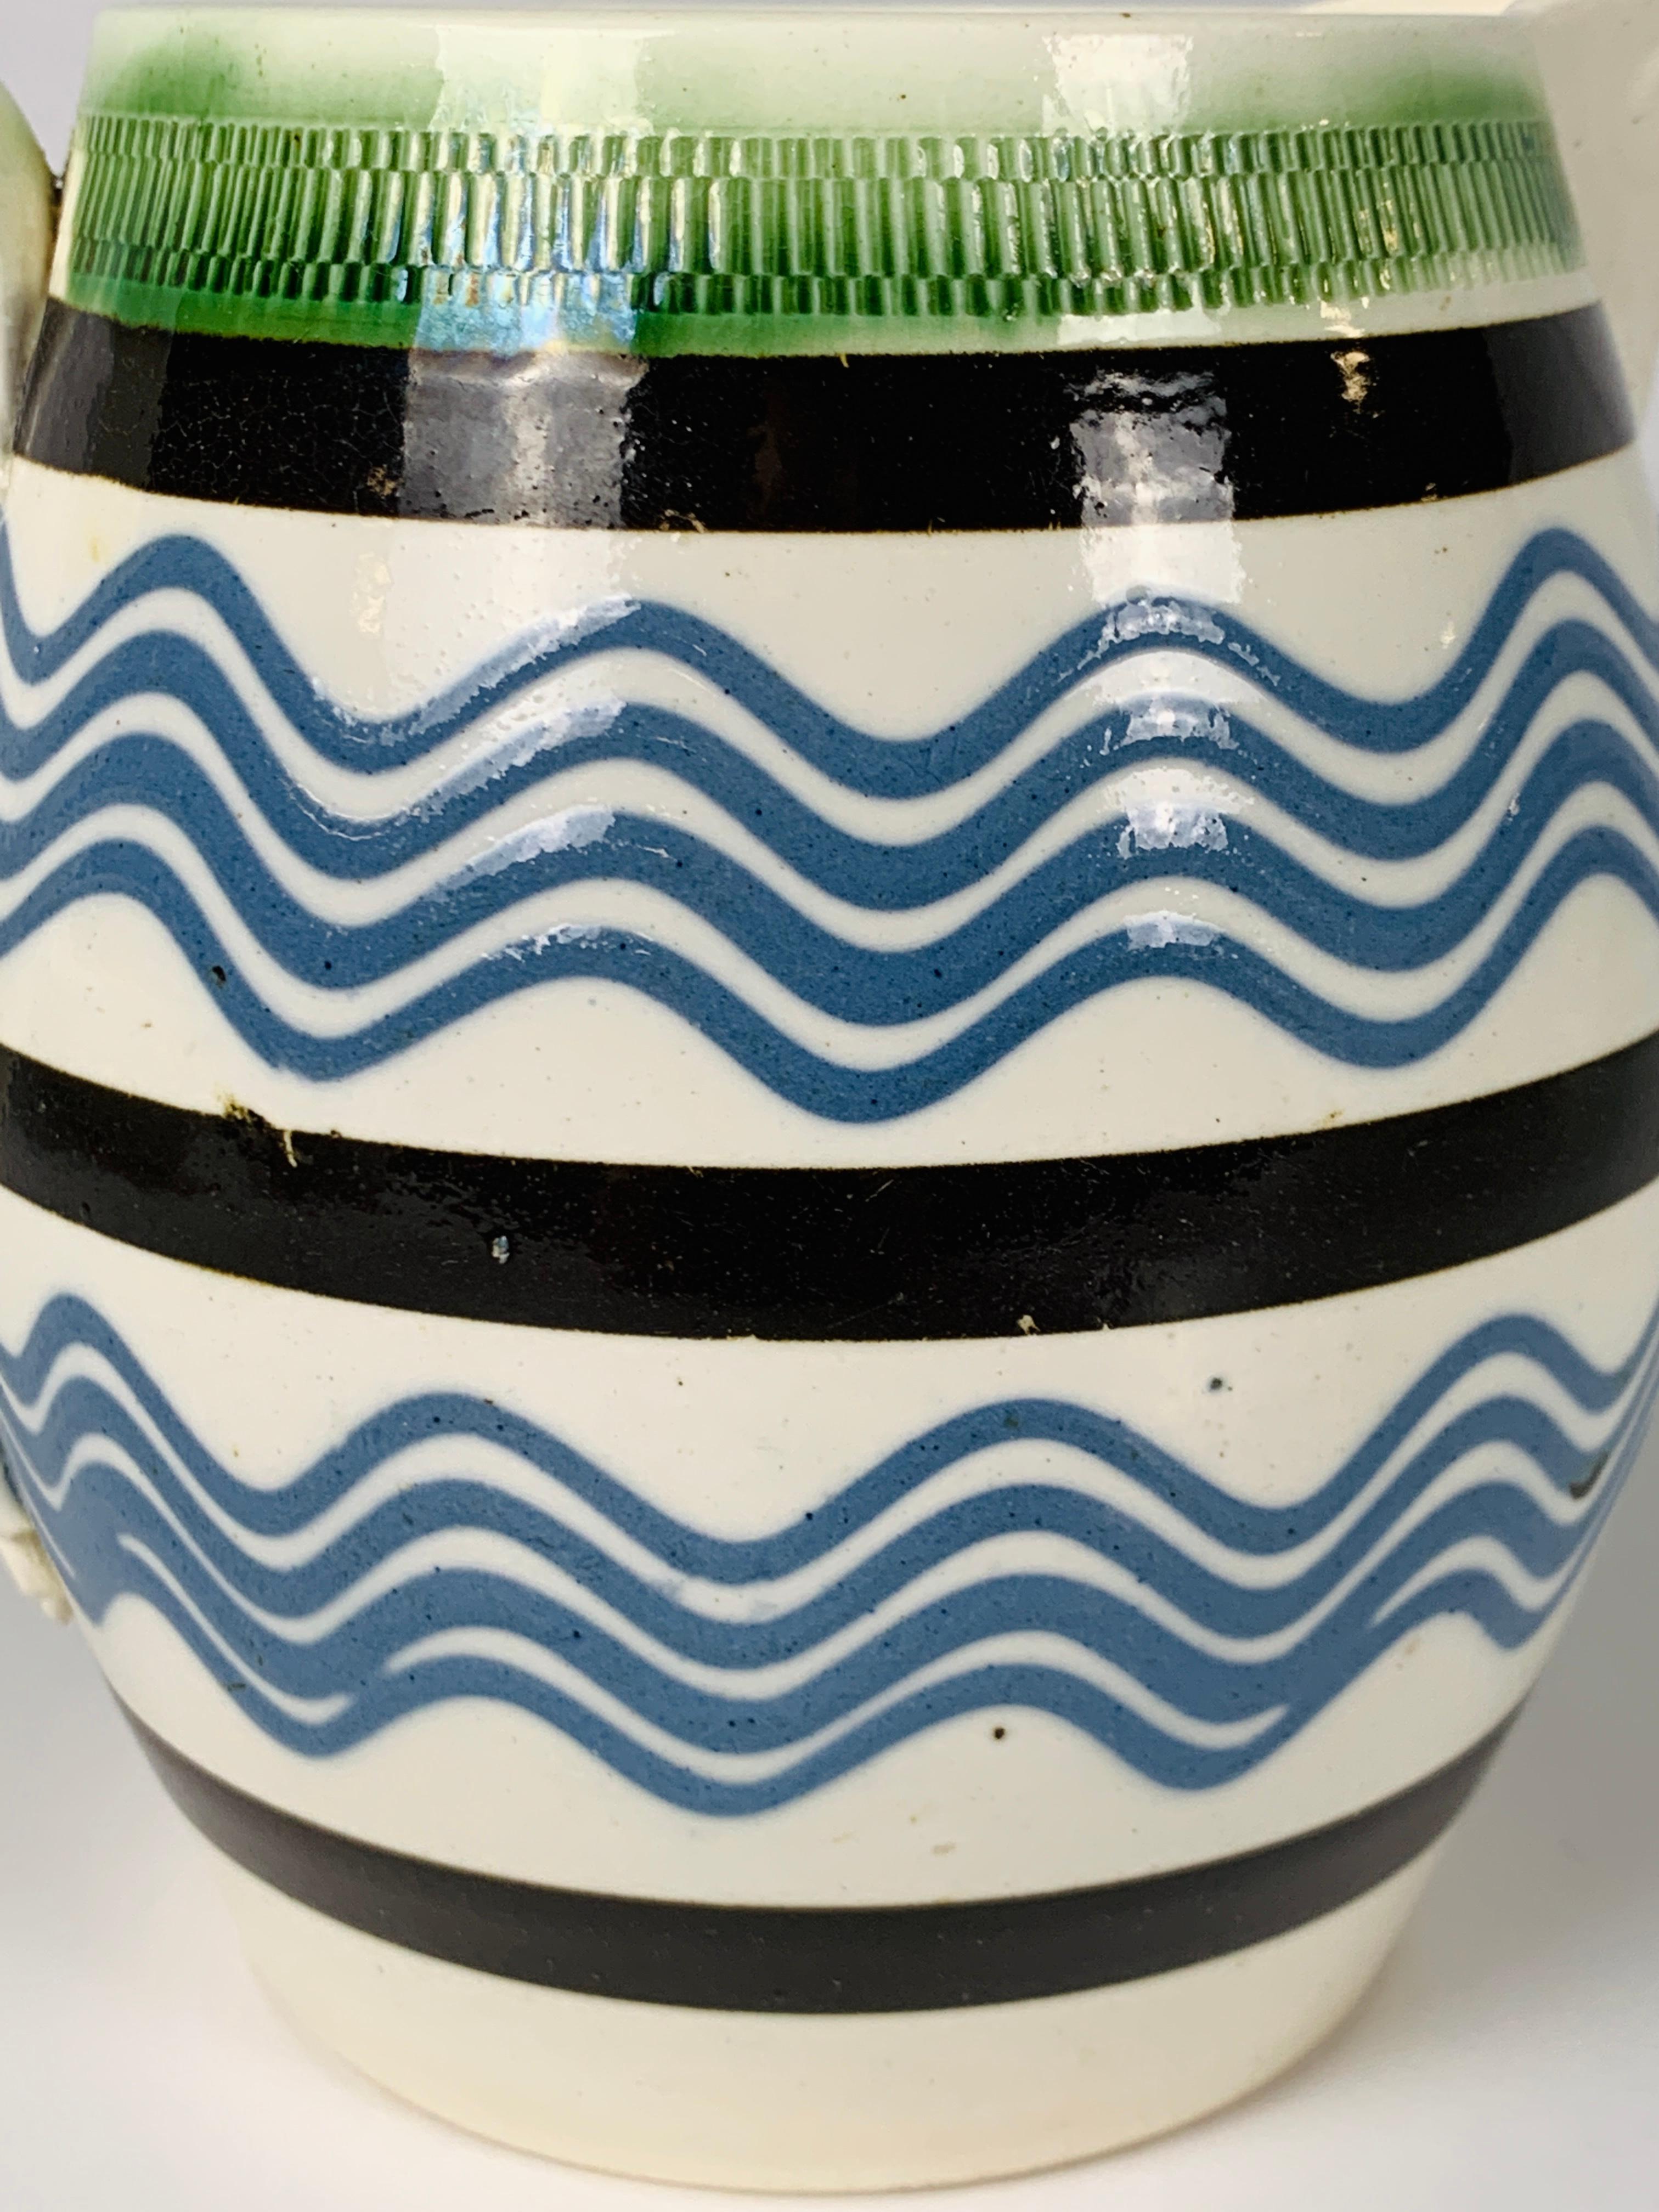 A mochaware pitcher with two panels showing four wavy sky-blue trailed slip lines, around the top edge a band of green glazed rouletting, and three bands of black slip. The color combination on this crisp white ground is exciting.
The spout has an